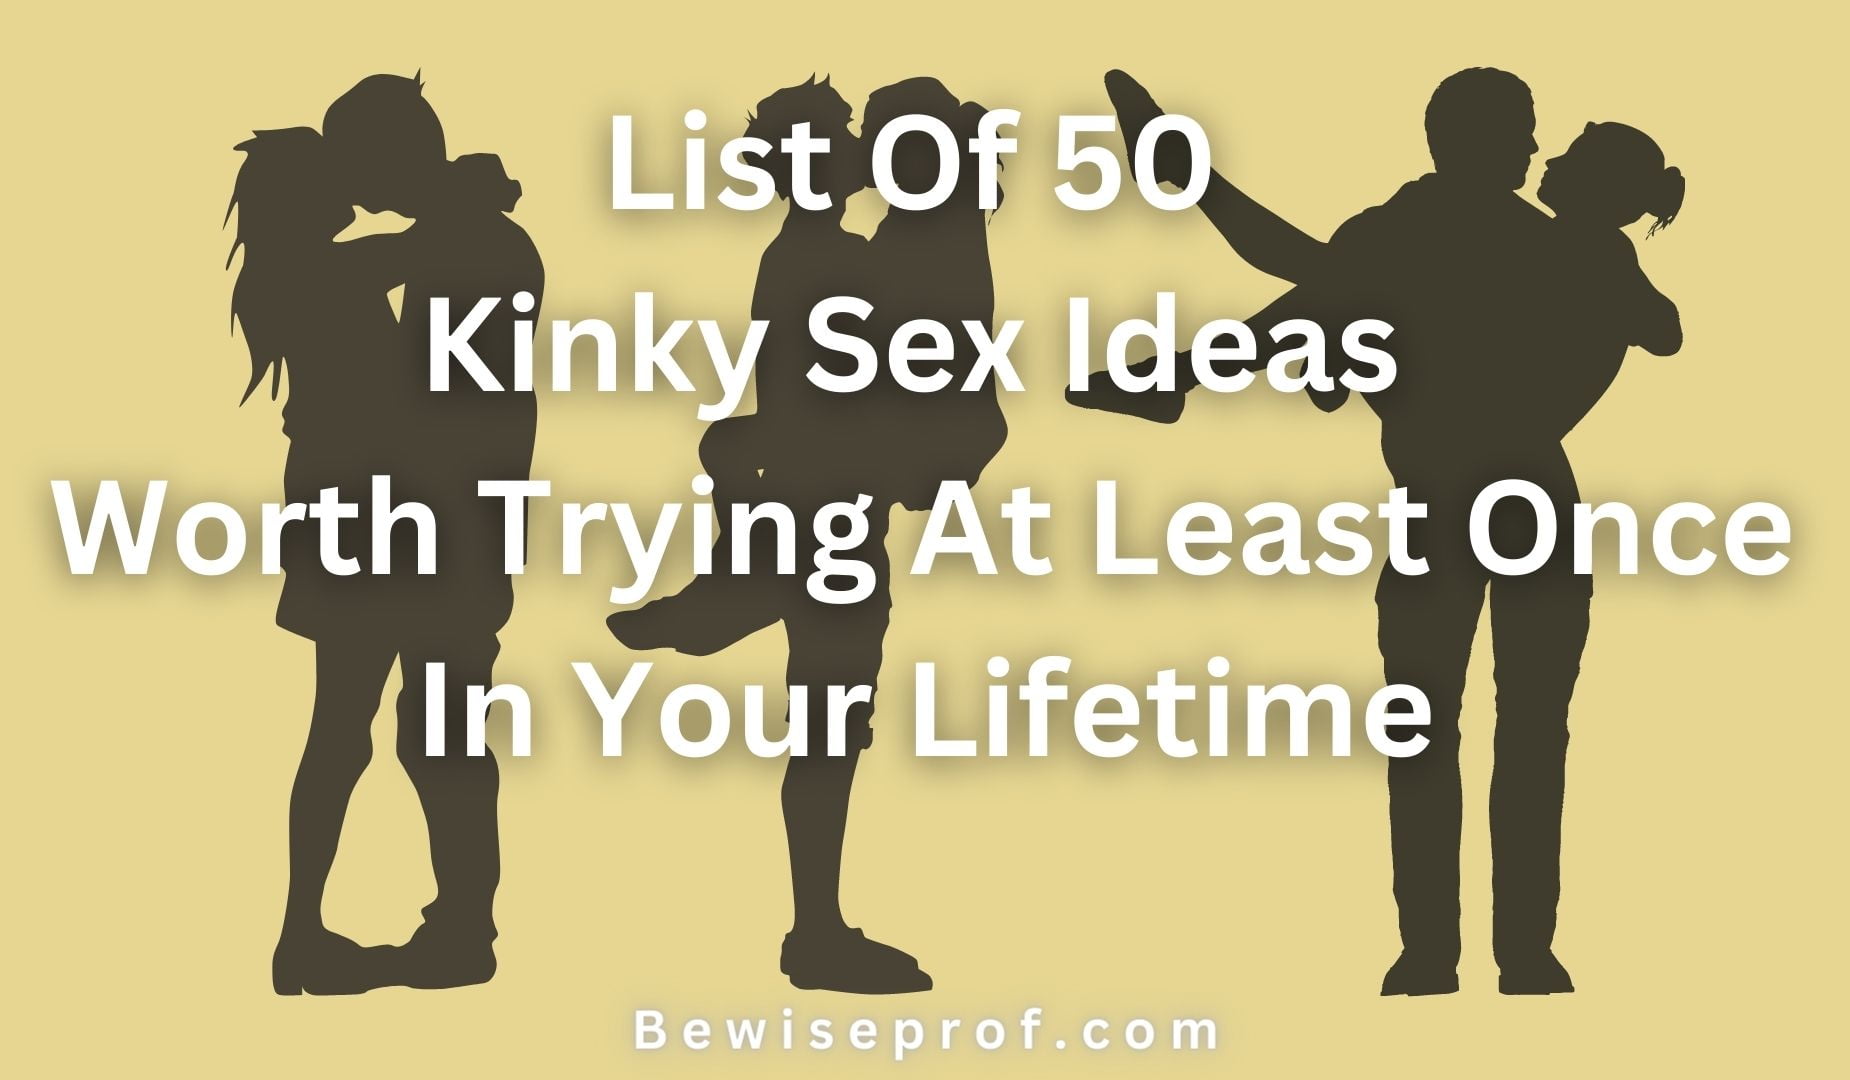 List Of 50 Kinky Sex Ideas Worth Trying At Least Once In Your Lifetime!